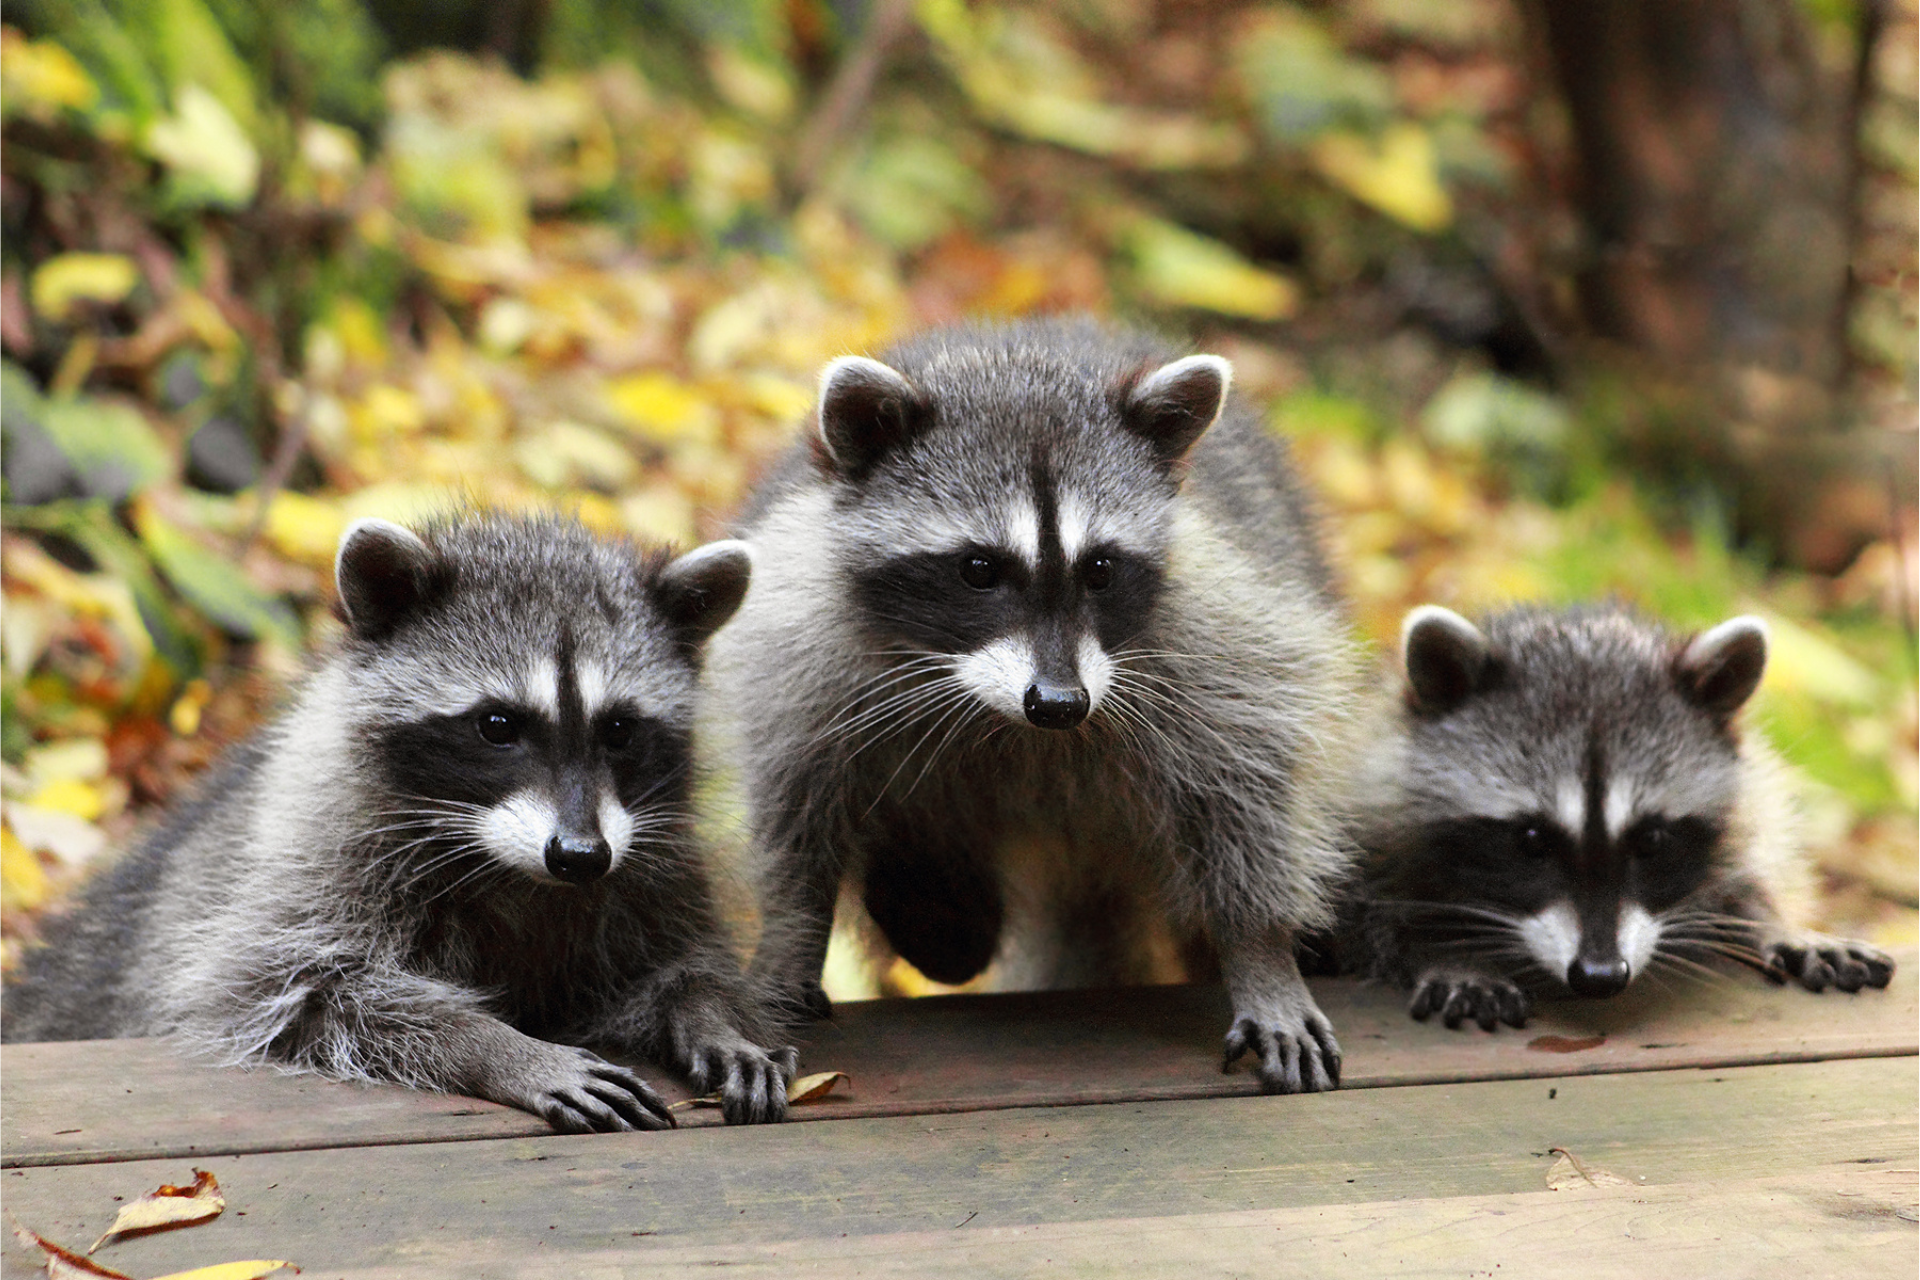 three raccoons are standing next to each other on a wooden surface .